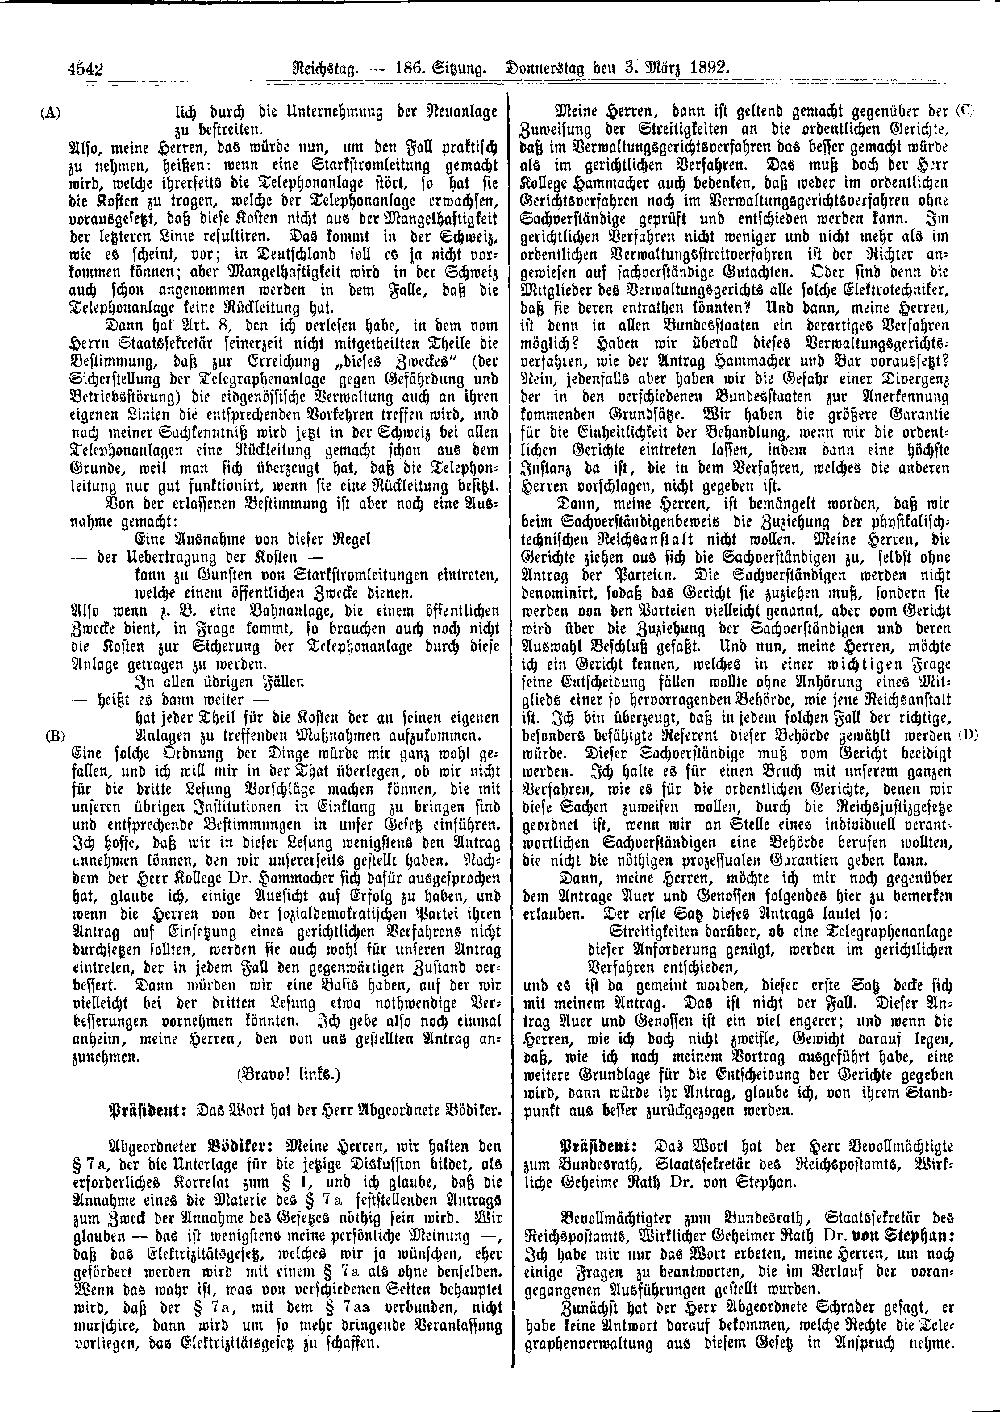 Scan of page 4542